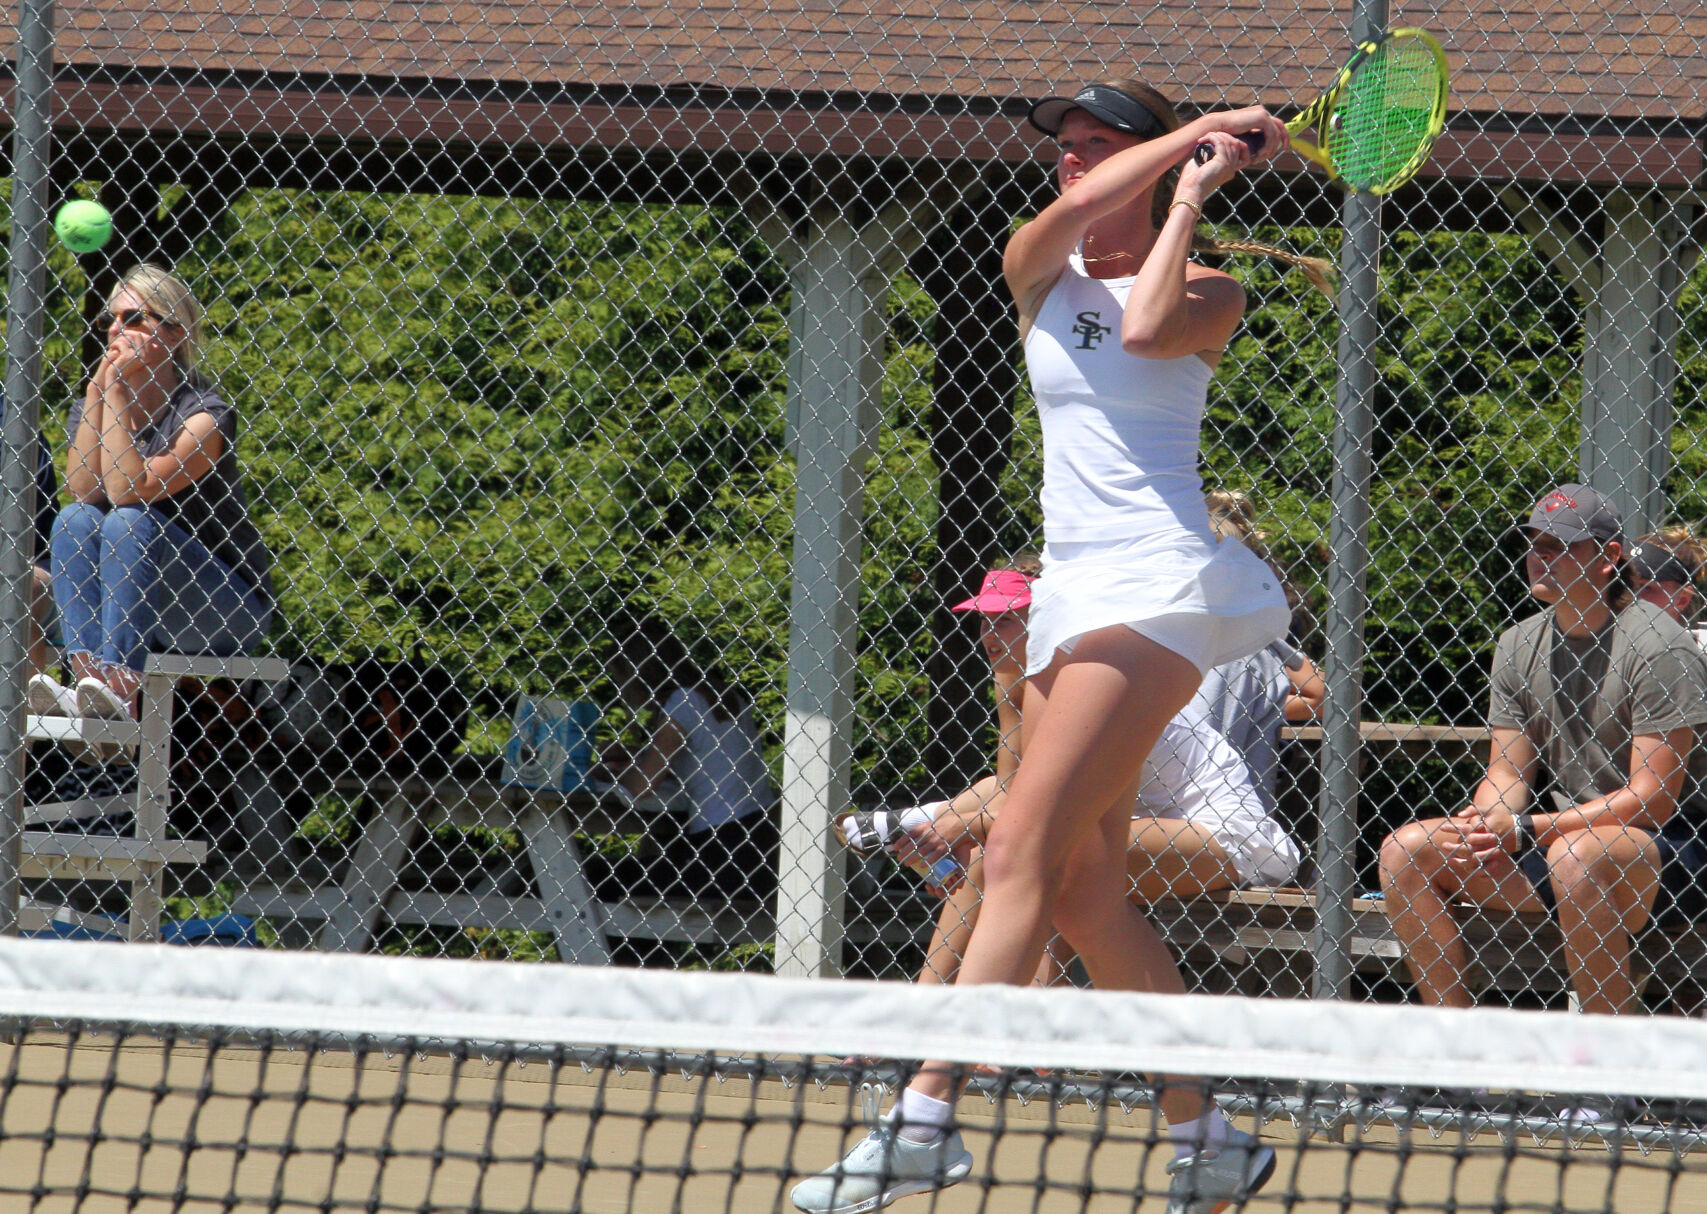 Traverse City St. Francis leads early in D4 tennis finals; Elk Rapids’ Johnstone aims for gold